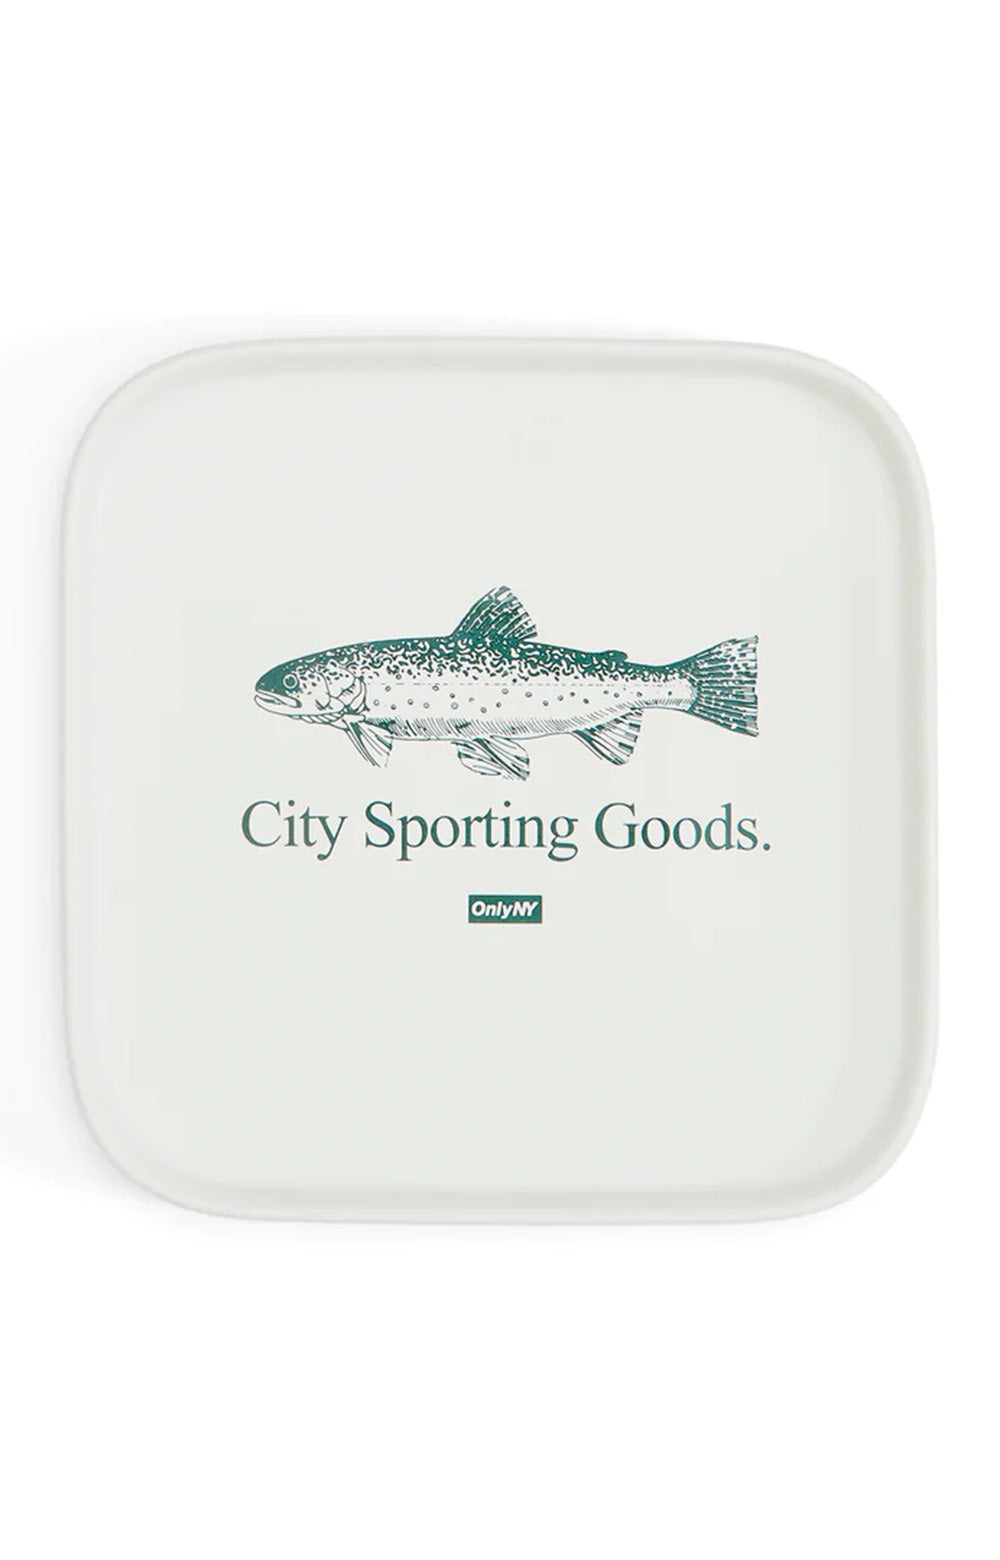 City Sporting Goods Catch-All Tray